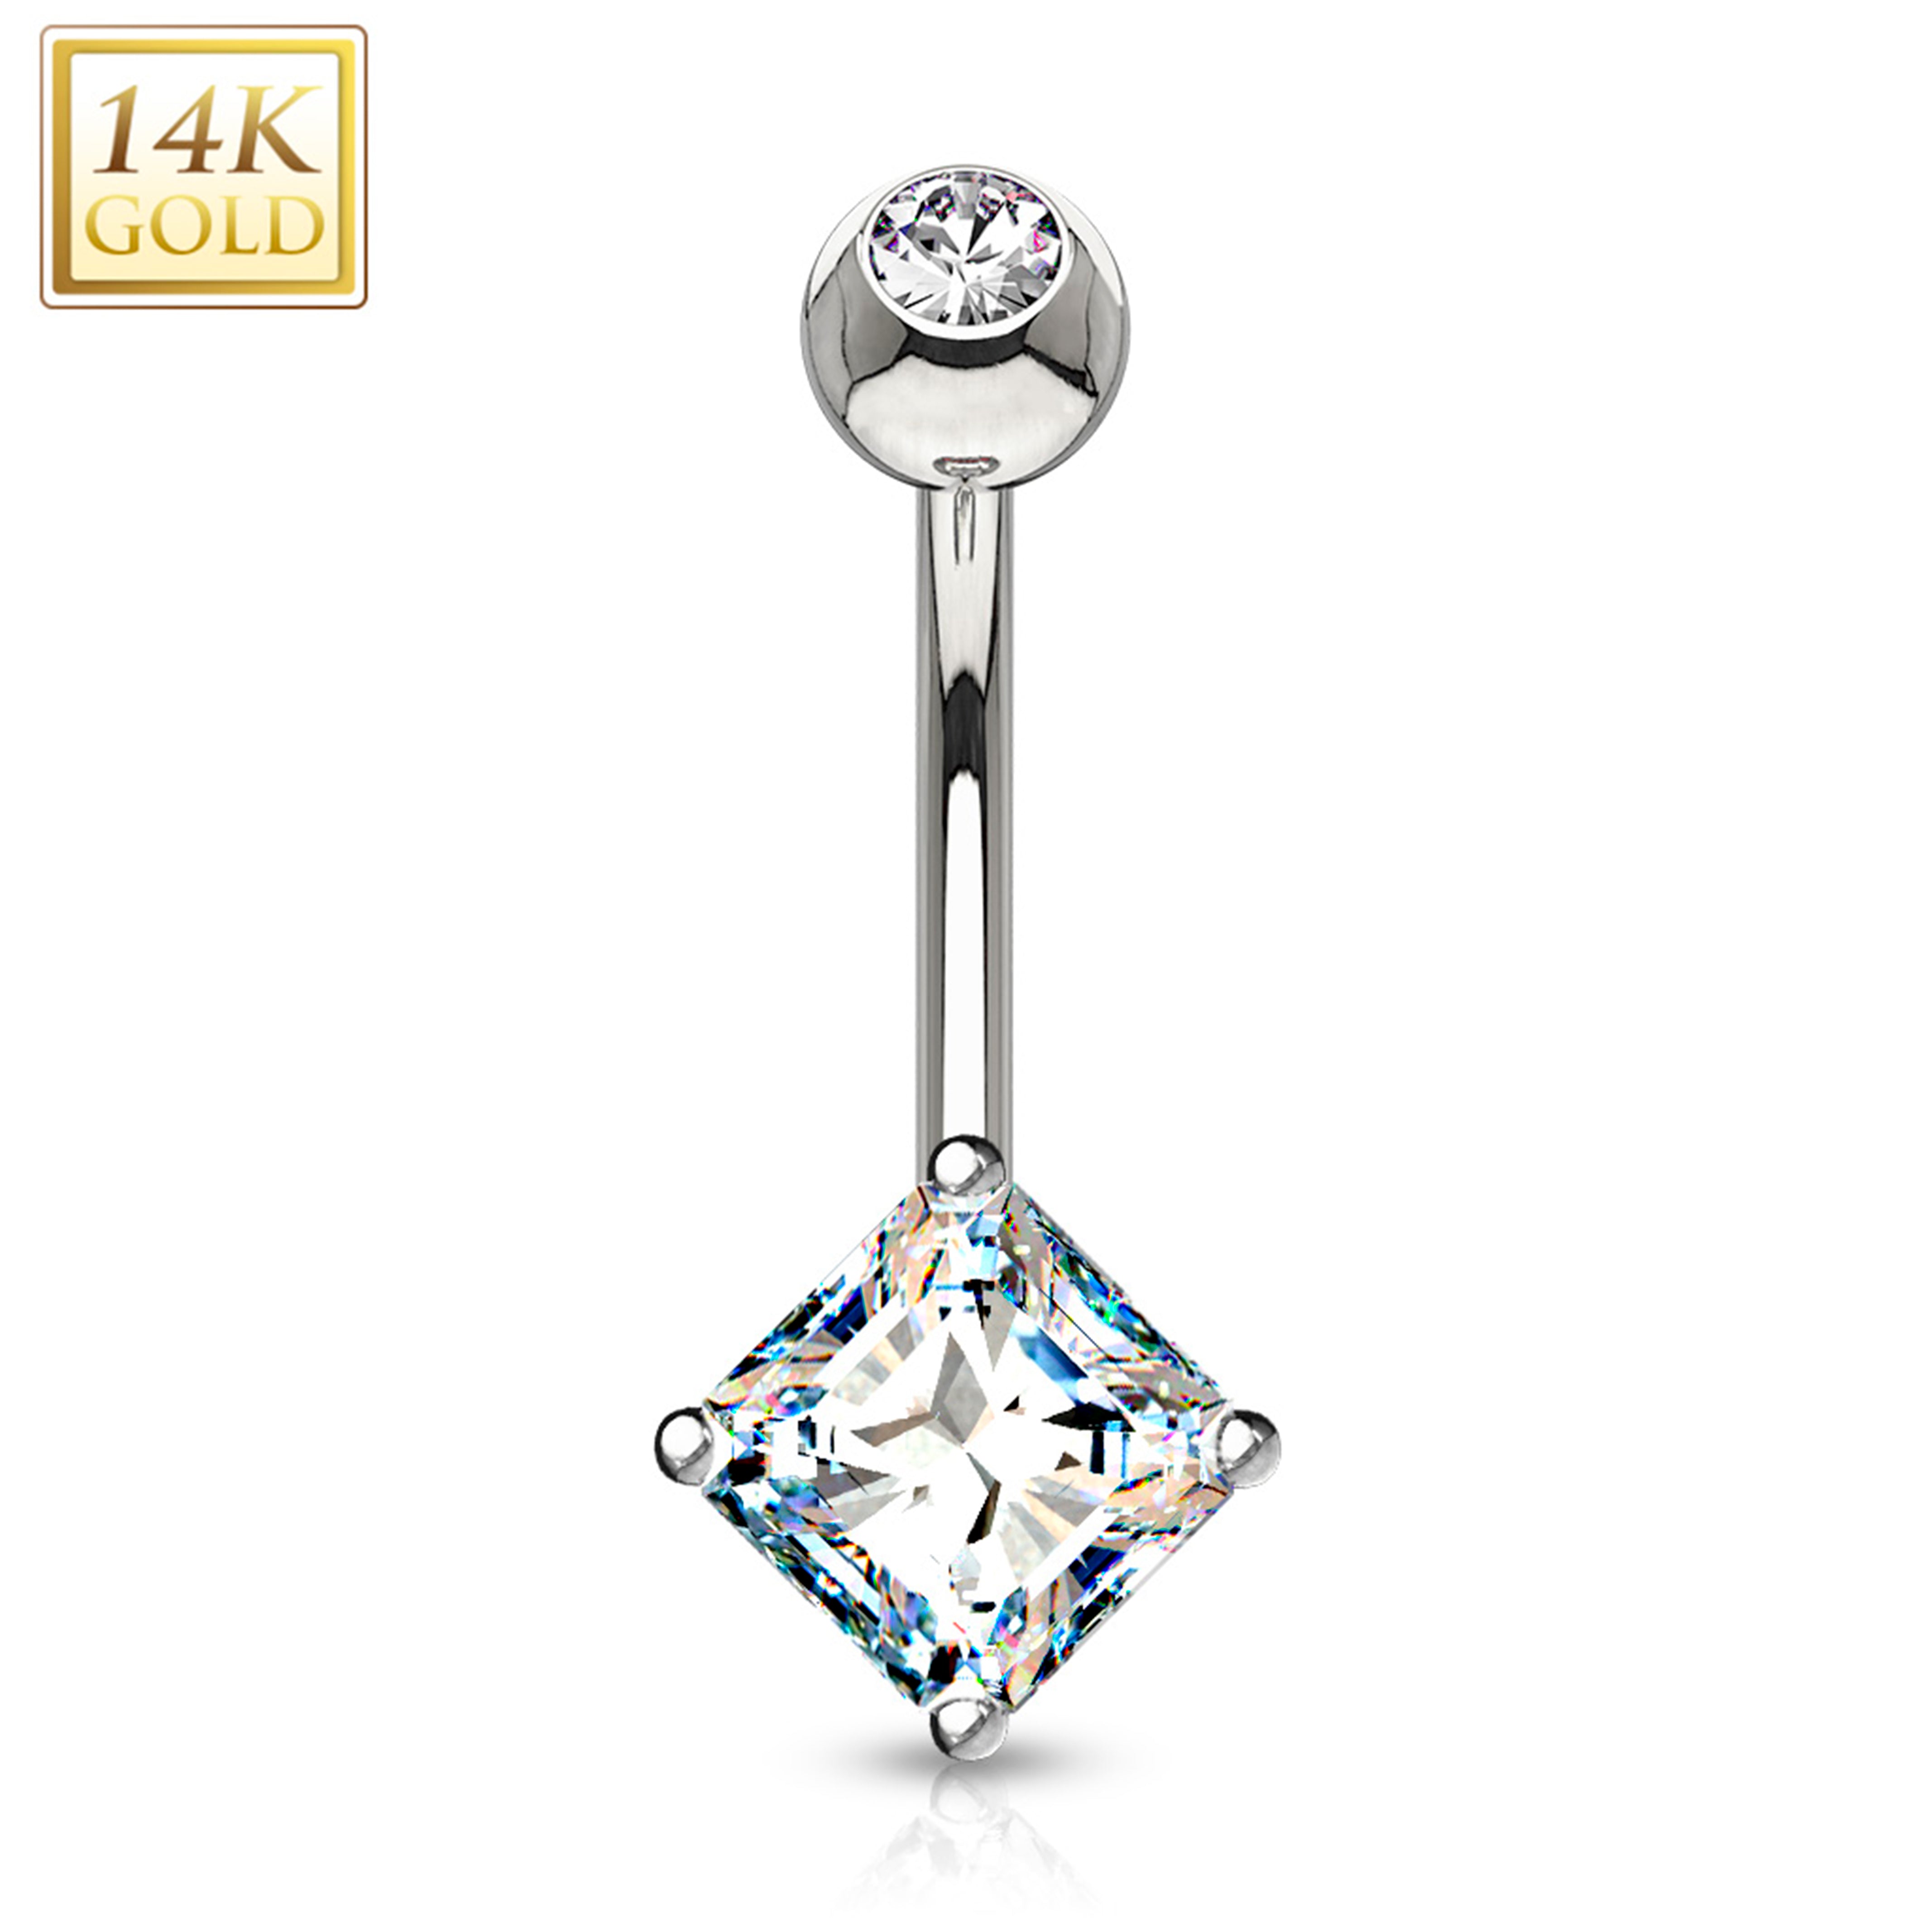 14k Solid White Gold Prong Set 5mm Princess Cut CZ Belly Ring